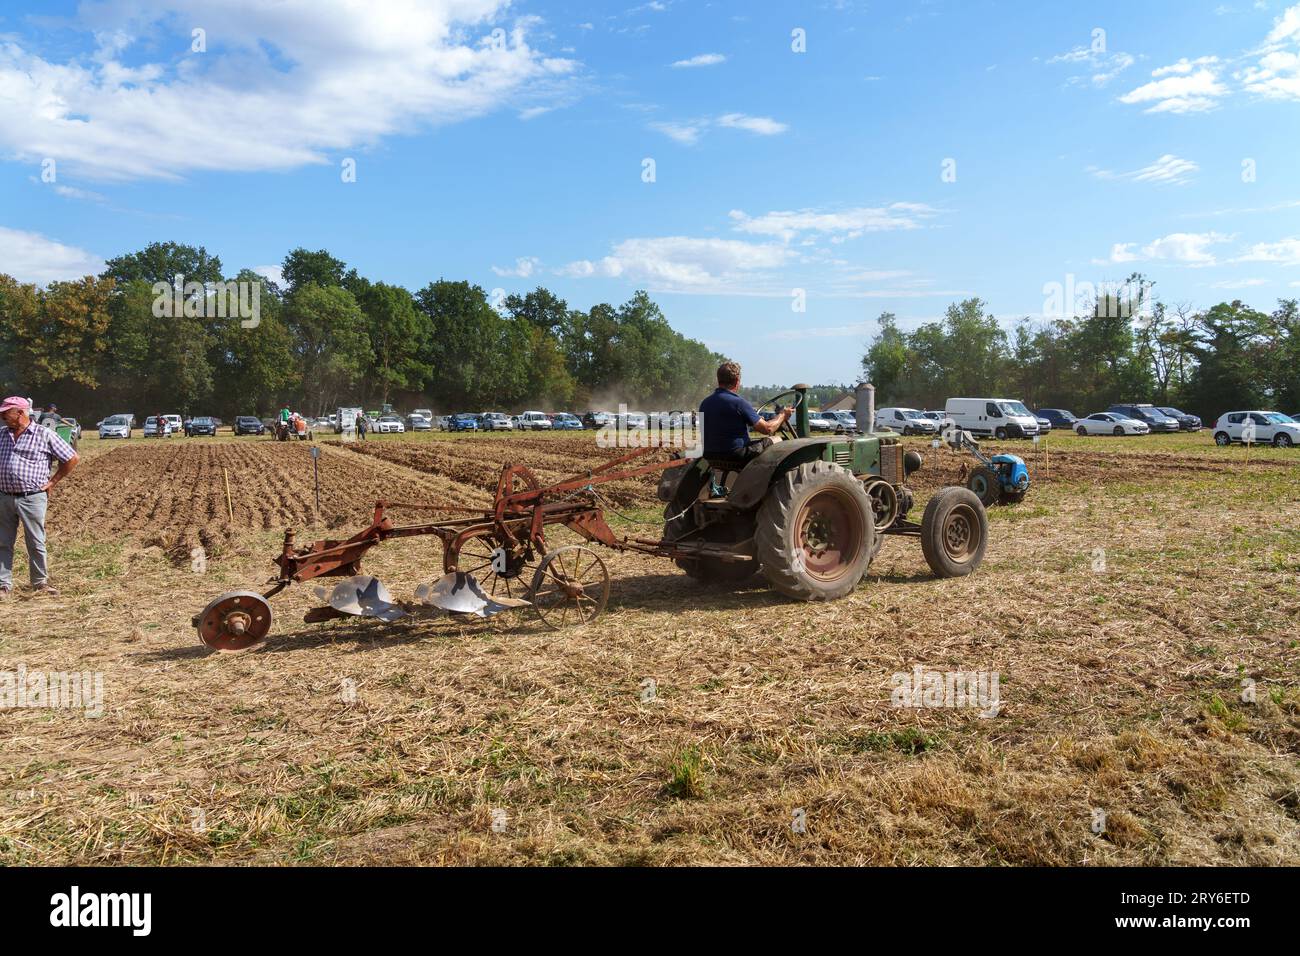 Competitors on vintage farm machinery taking place in a ploughing competition. Stock Photo